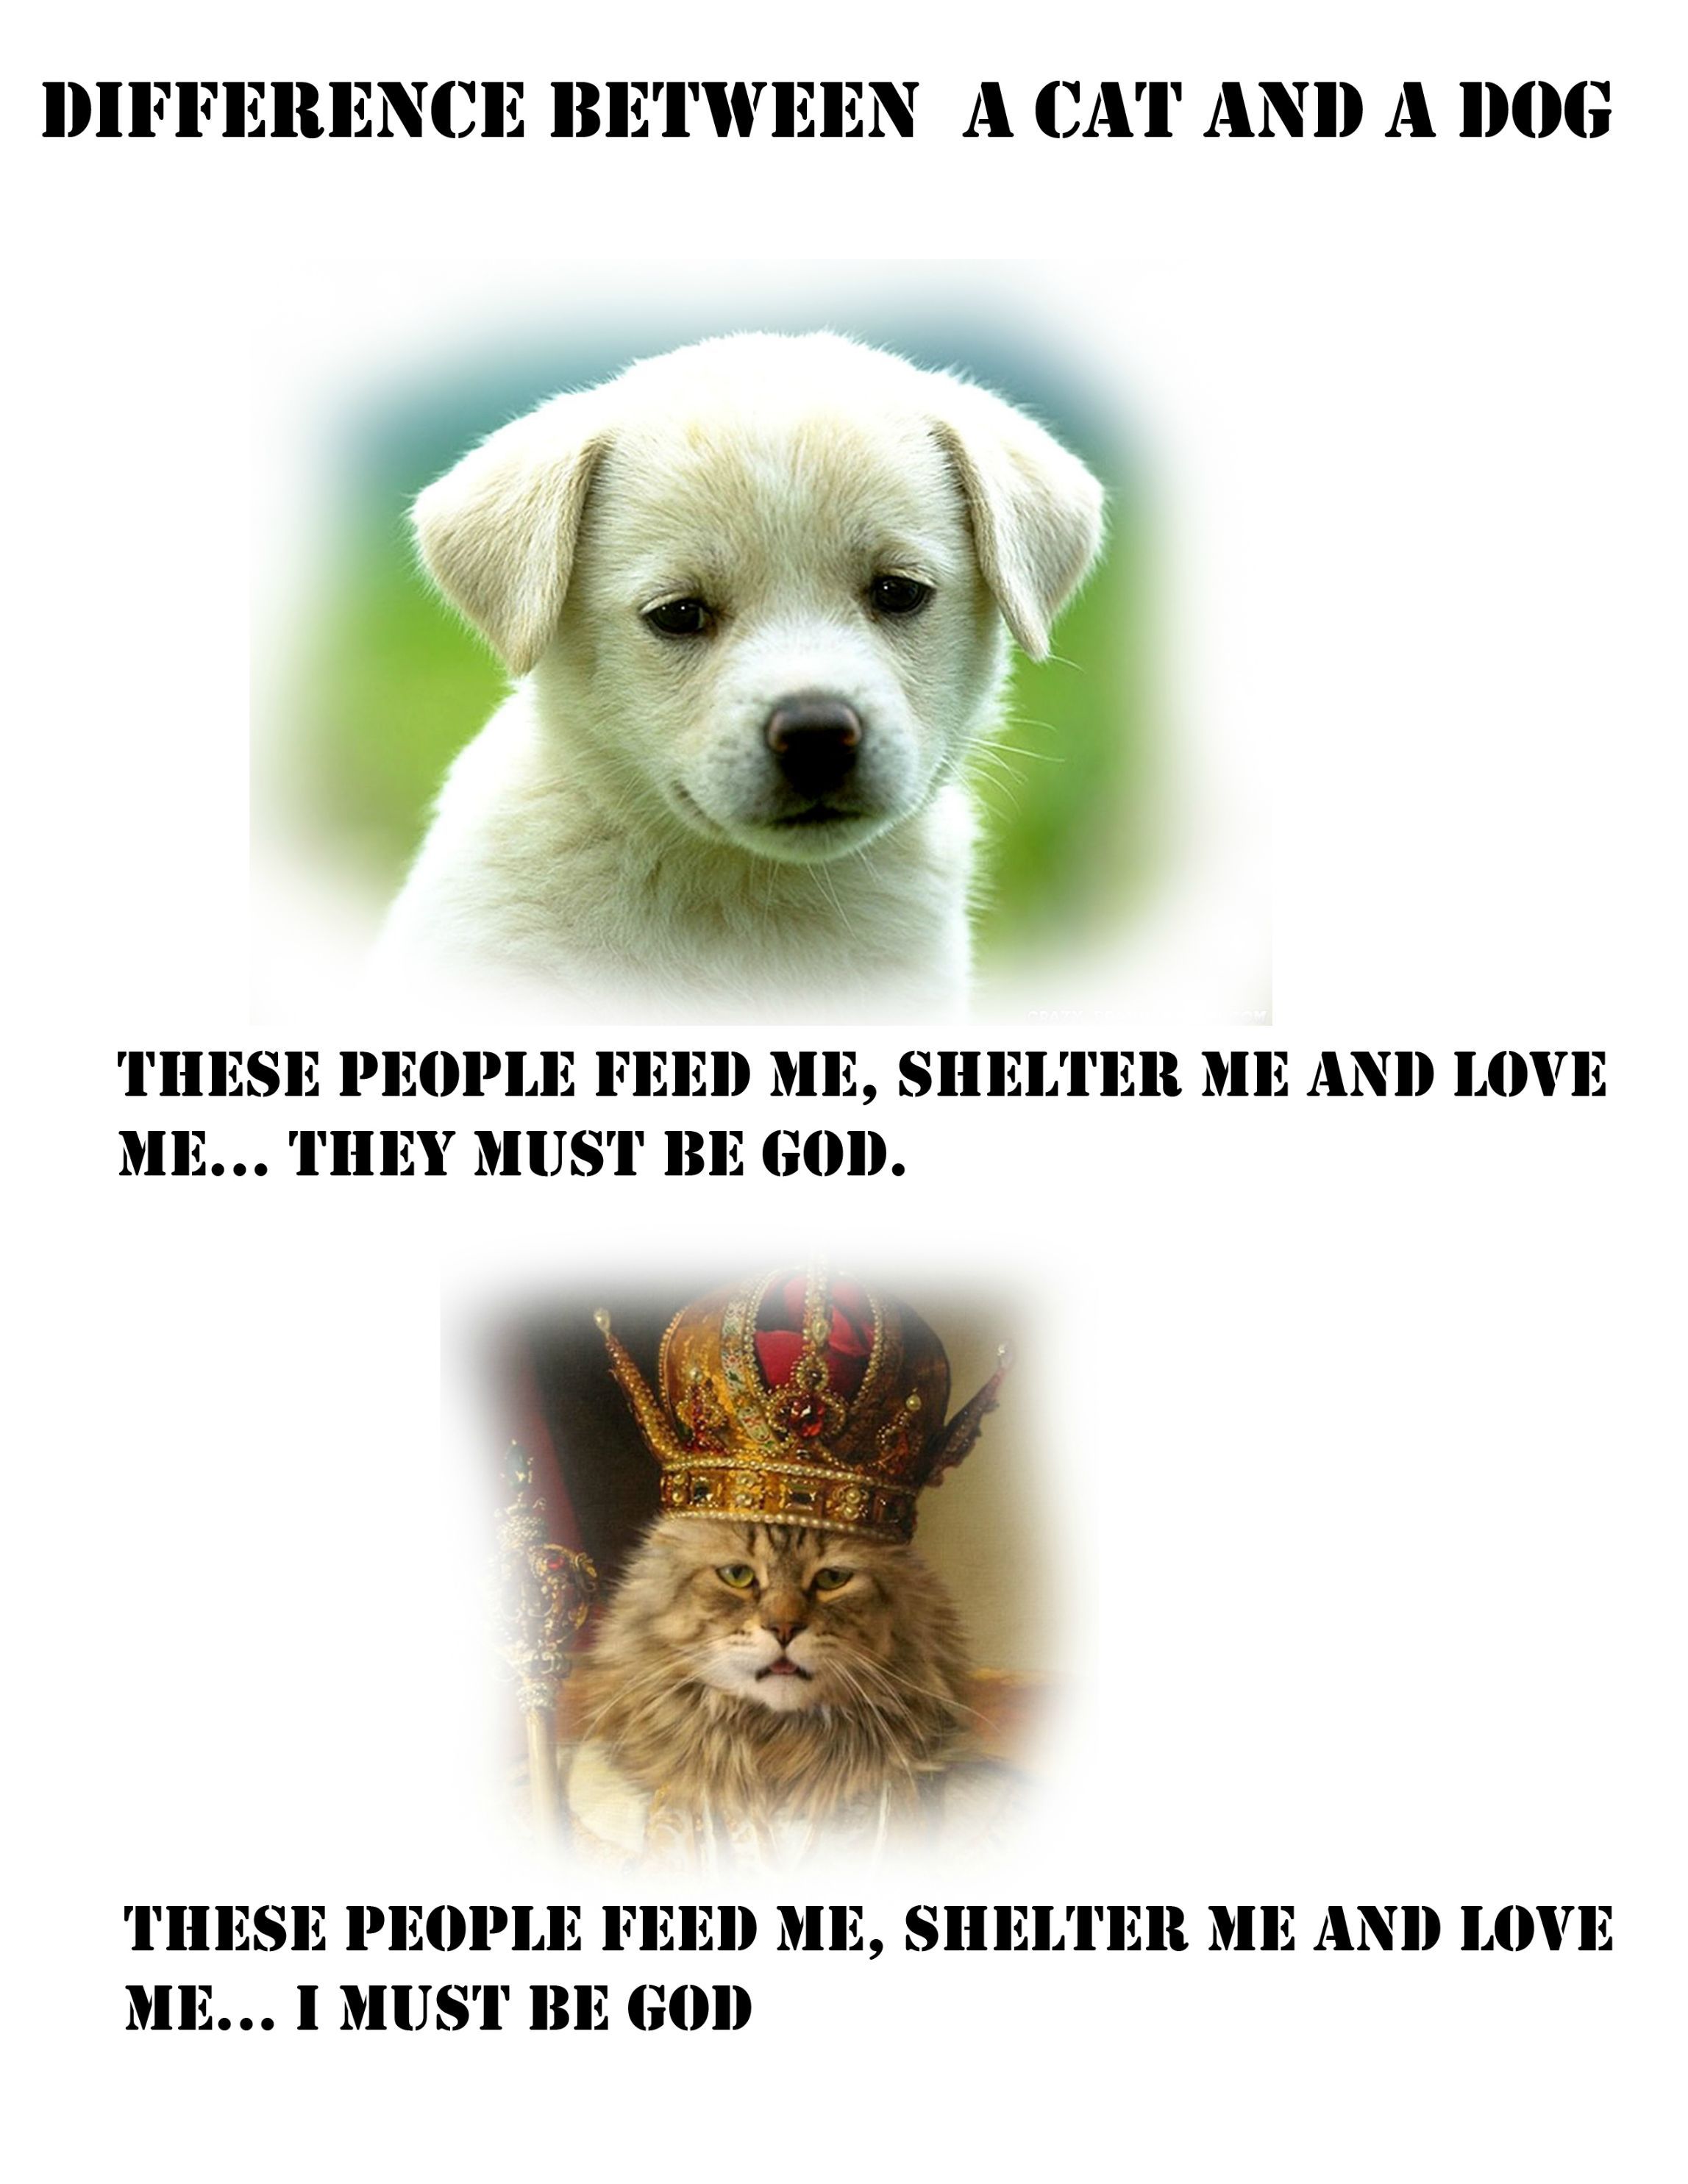 The difference between a cat and a dog